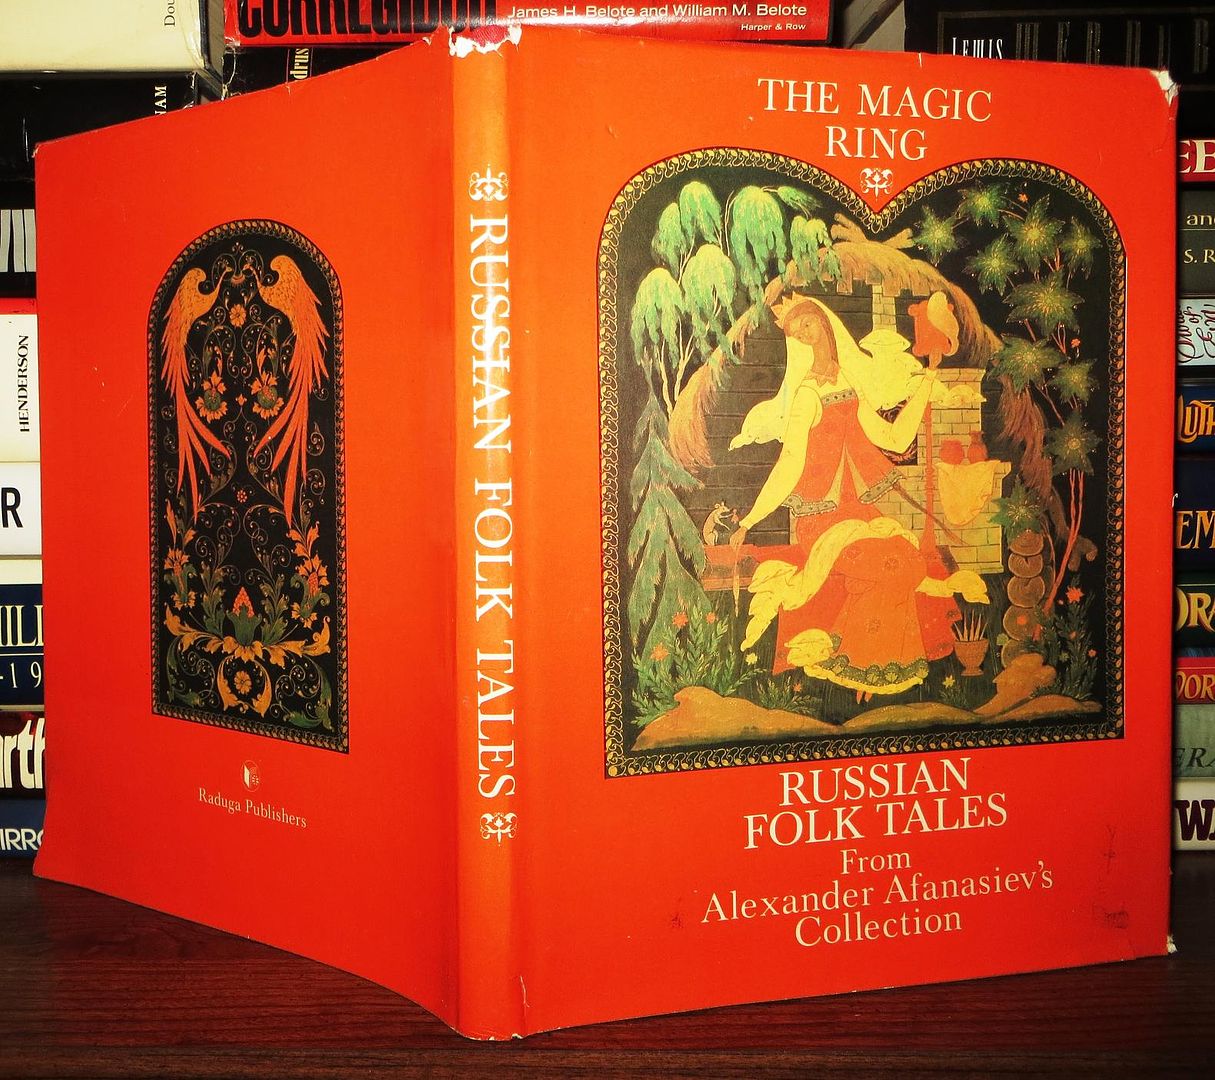 AFANASIEV, ALEXANDER.   A. KURKIN - The Magic Ring : Russian Folk Tales from Alexander Afanasiev's Collection